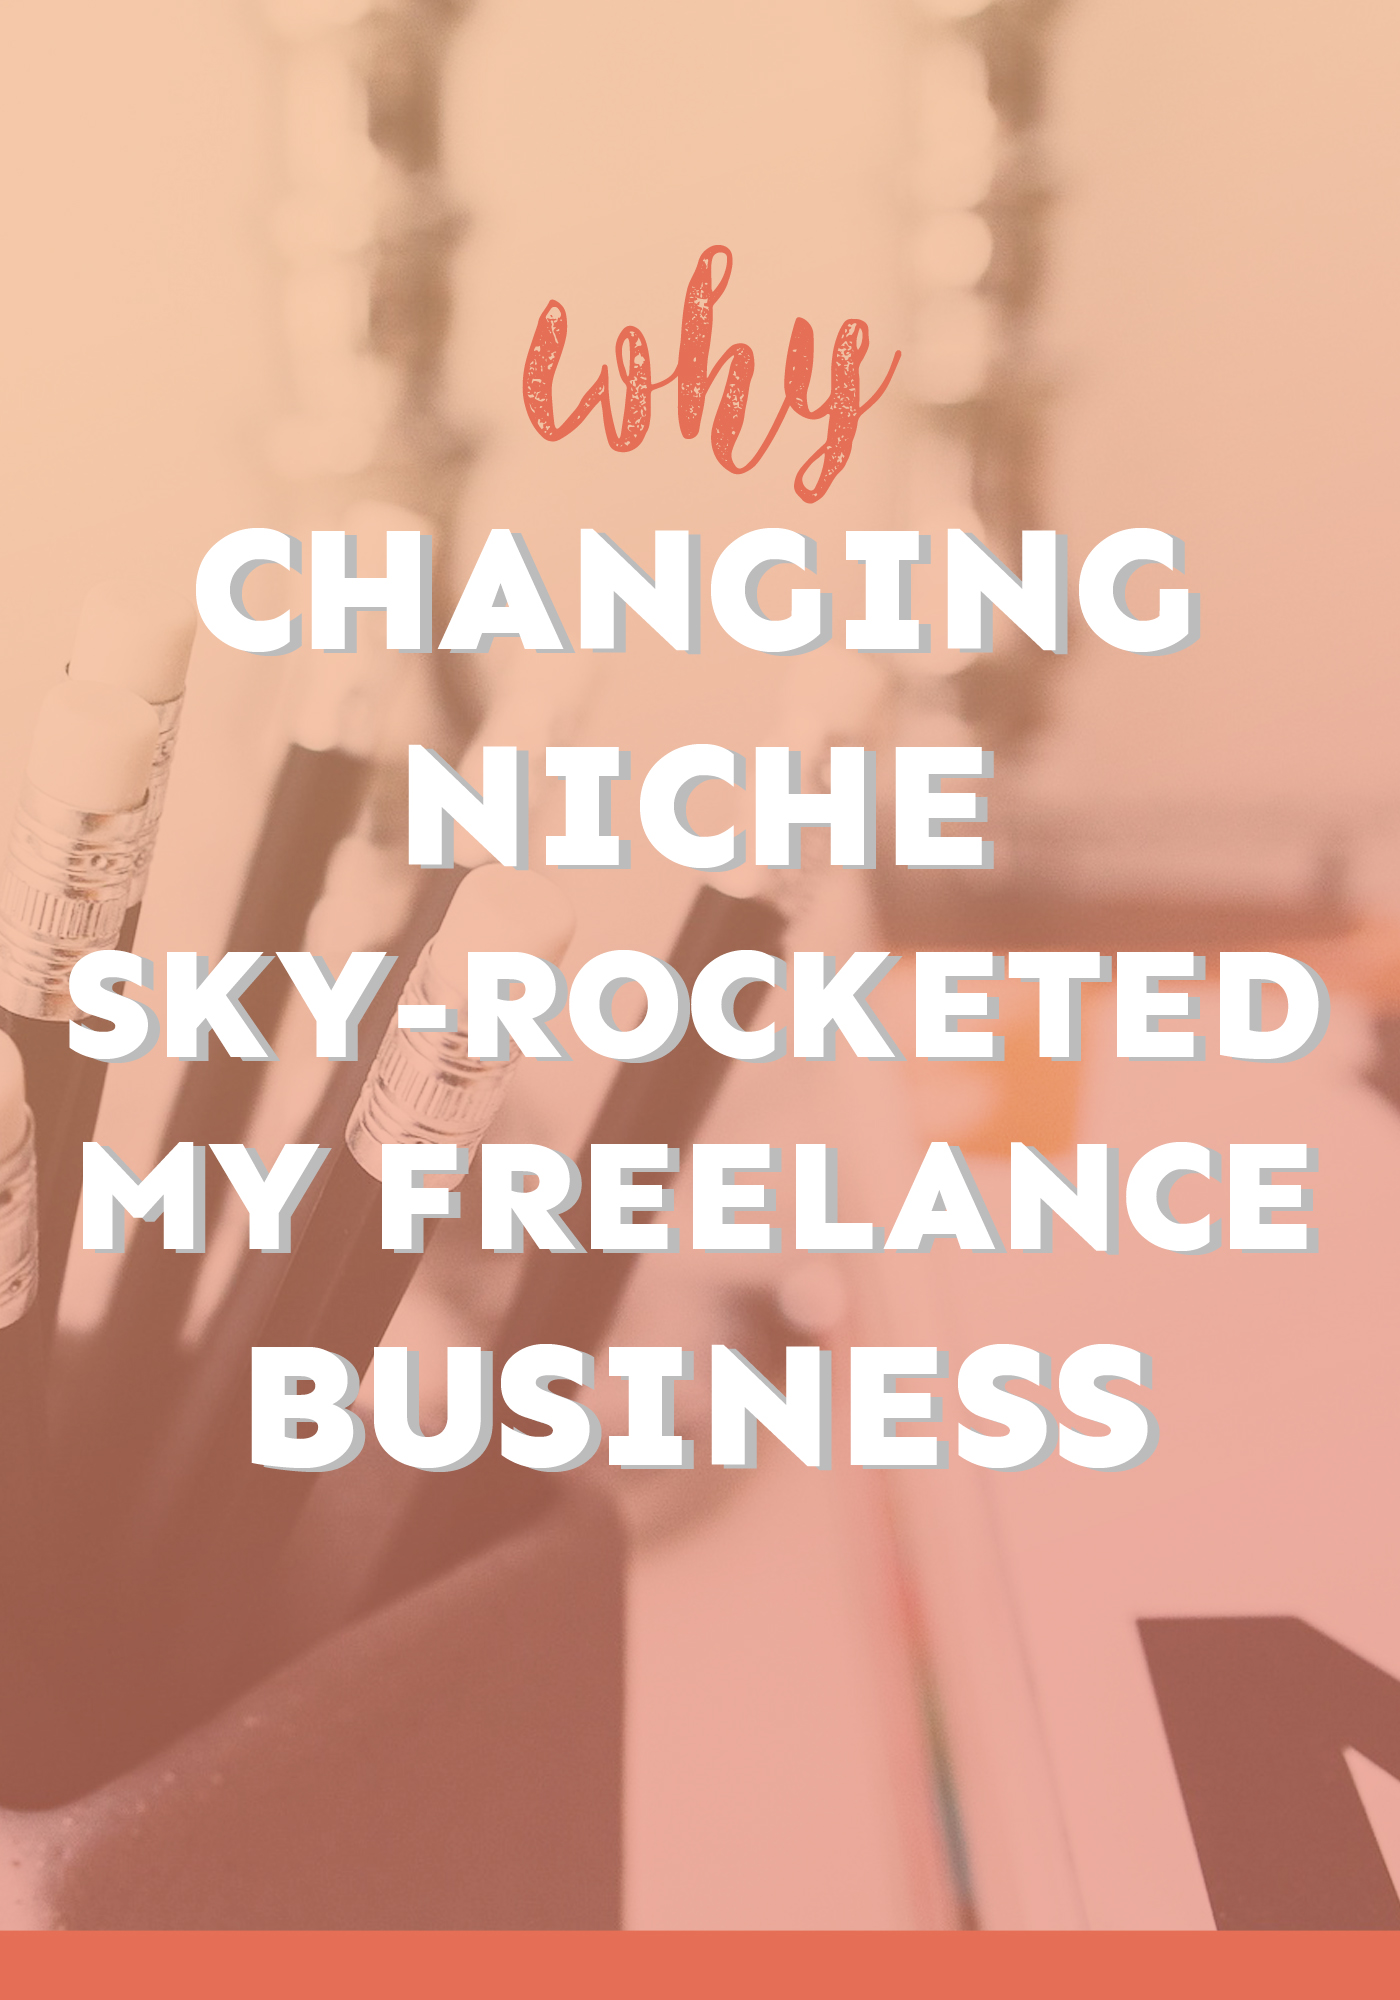 Thinking about changing niche but worried how it'll affect your business? Worry not! Here's how it sky-rocketed my freelance business! 